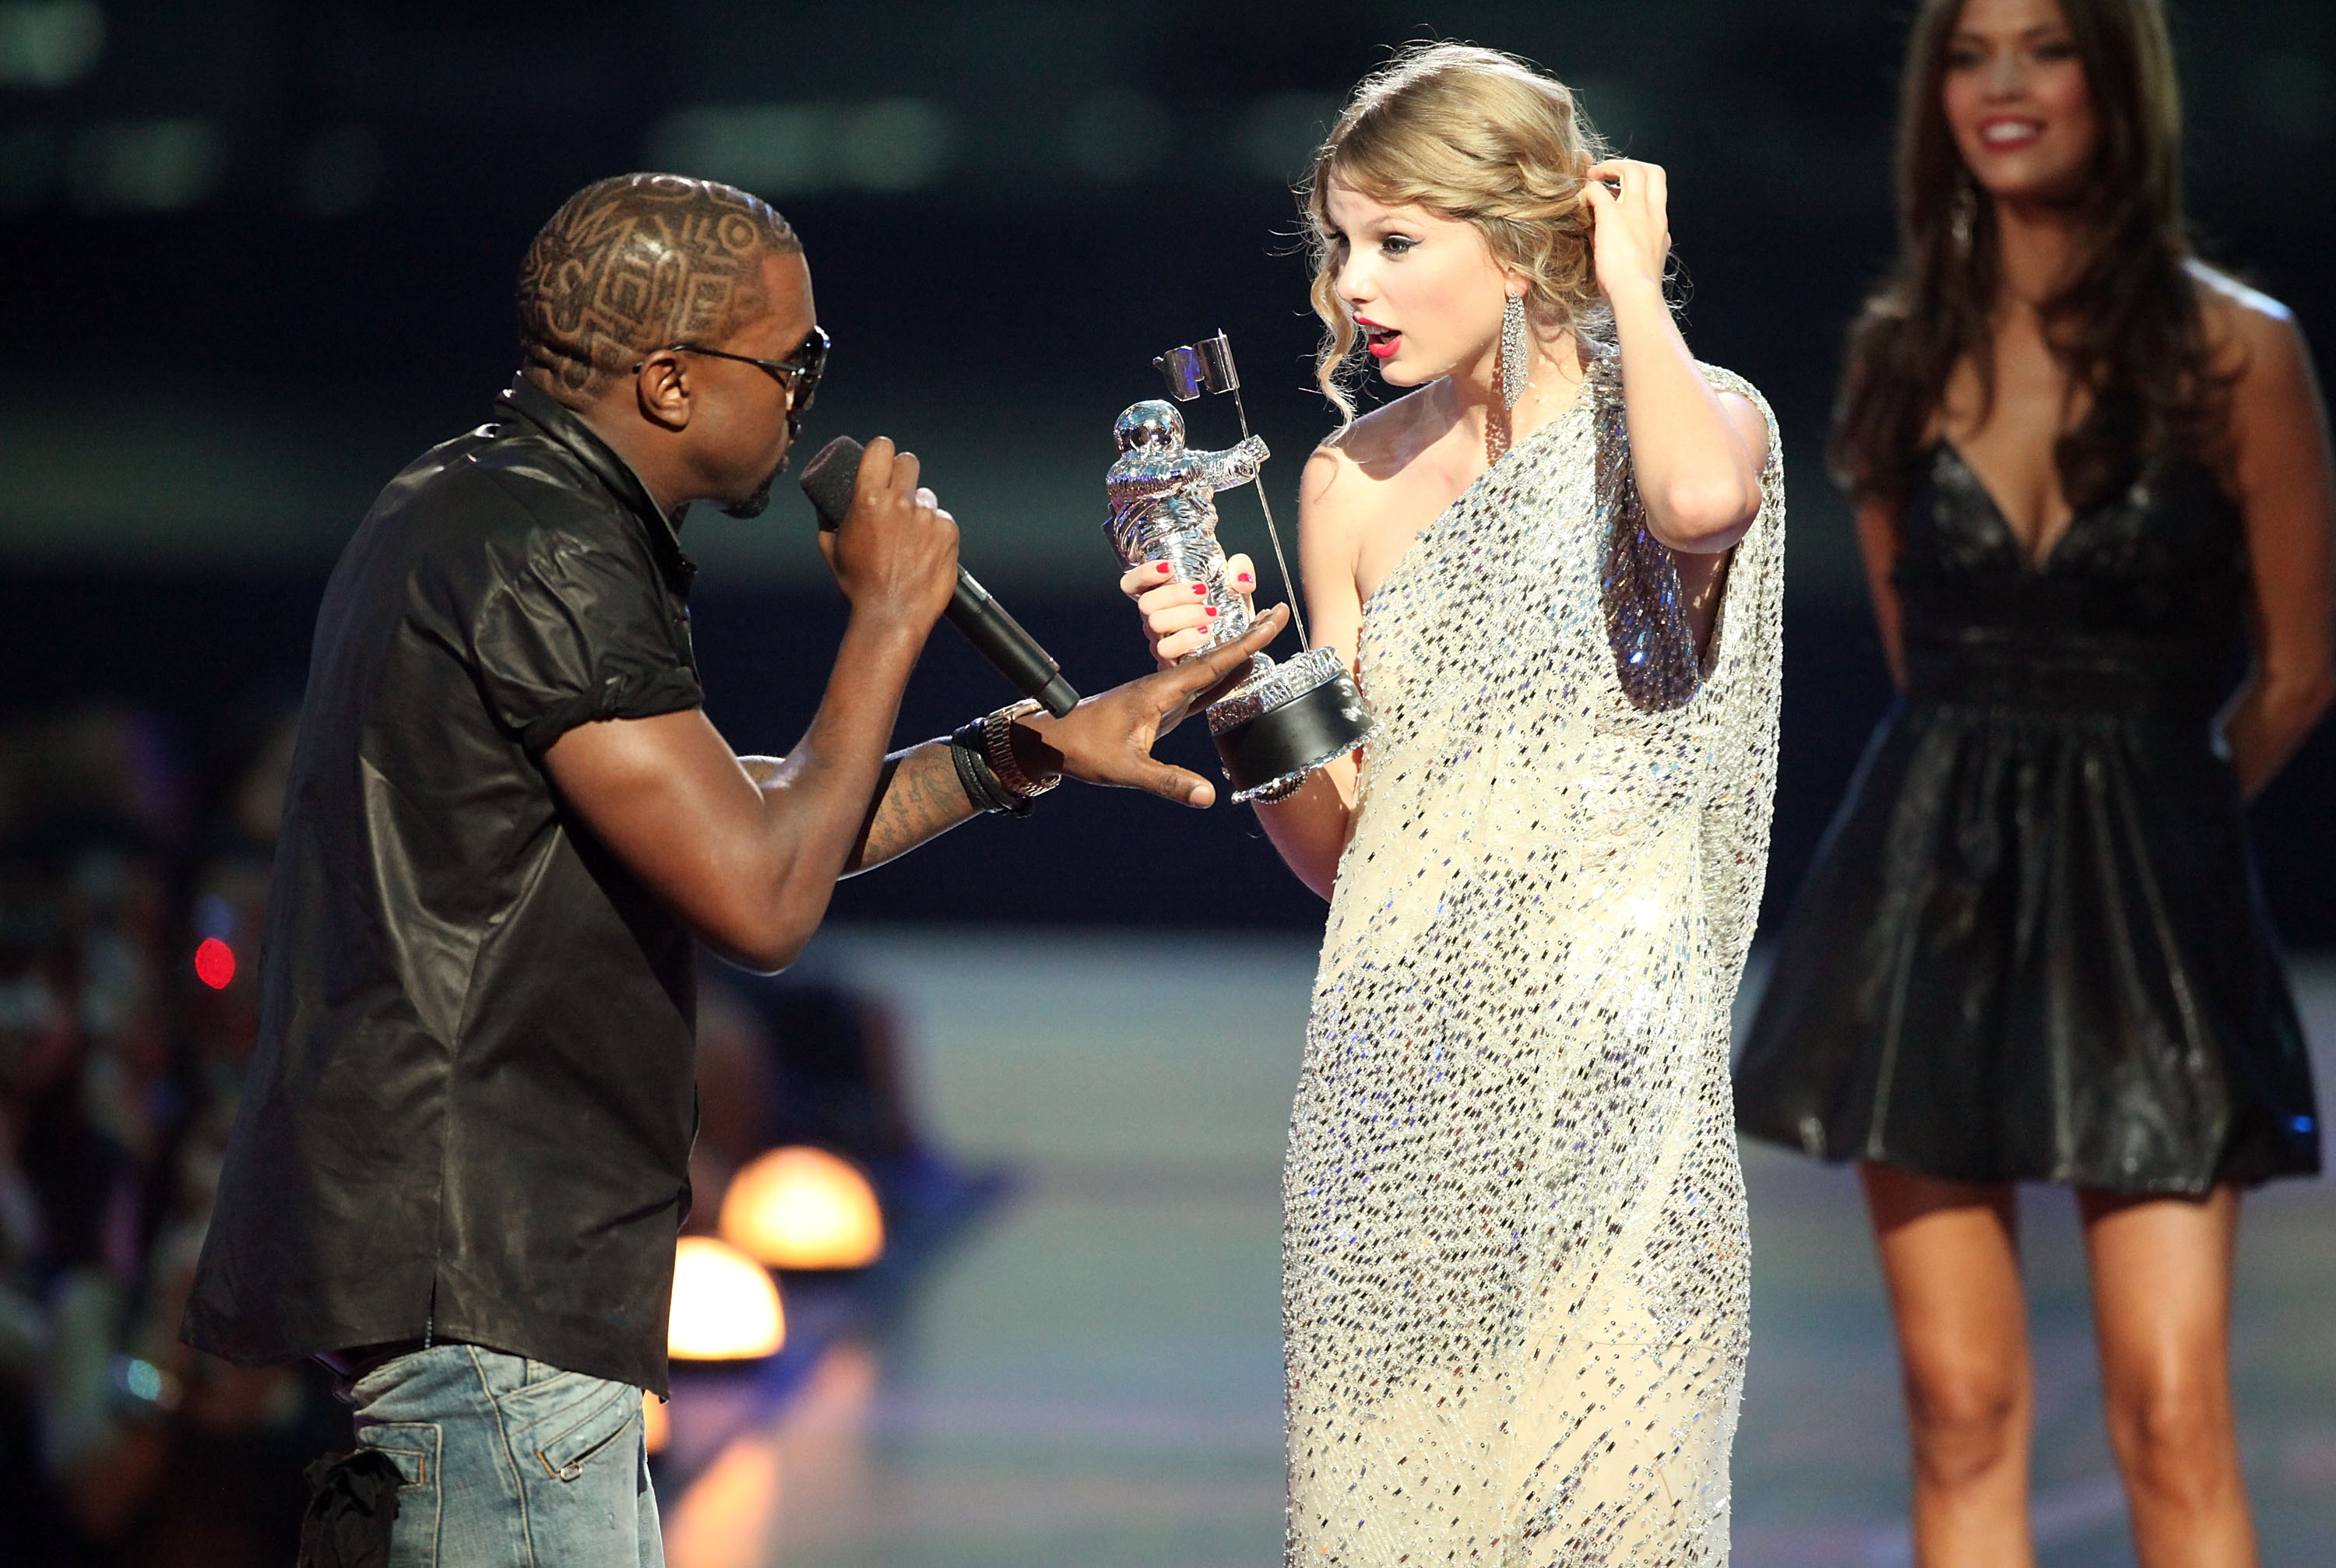 Kanye West and Taylor Swift at MTV VMAs 2009 (Image: Getty Images)